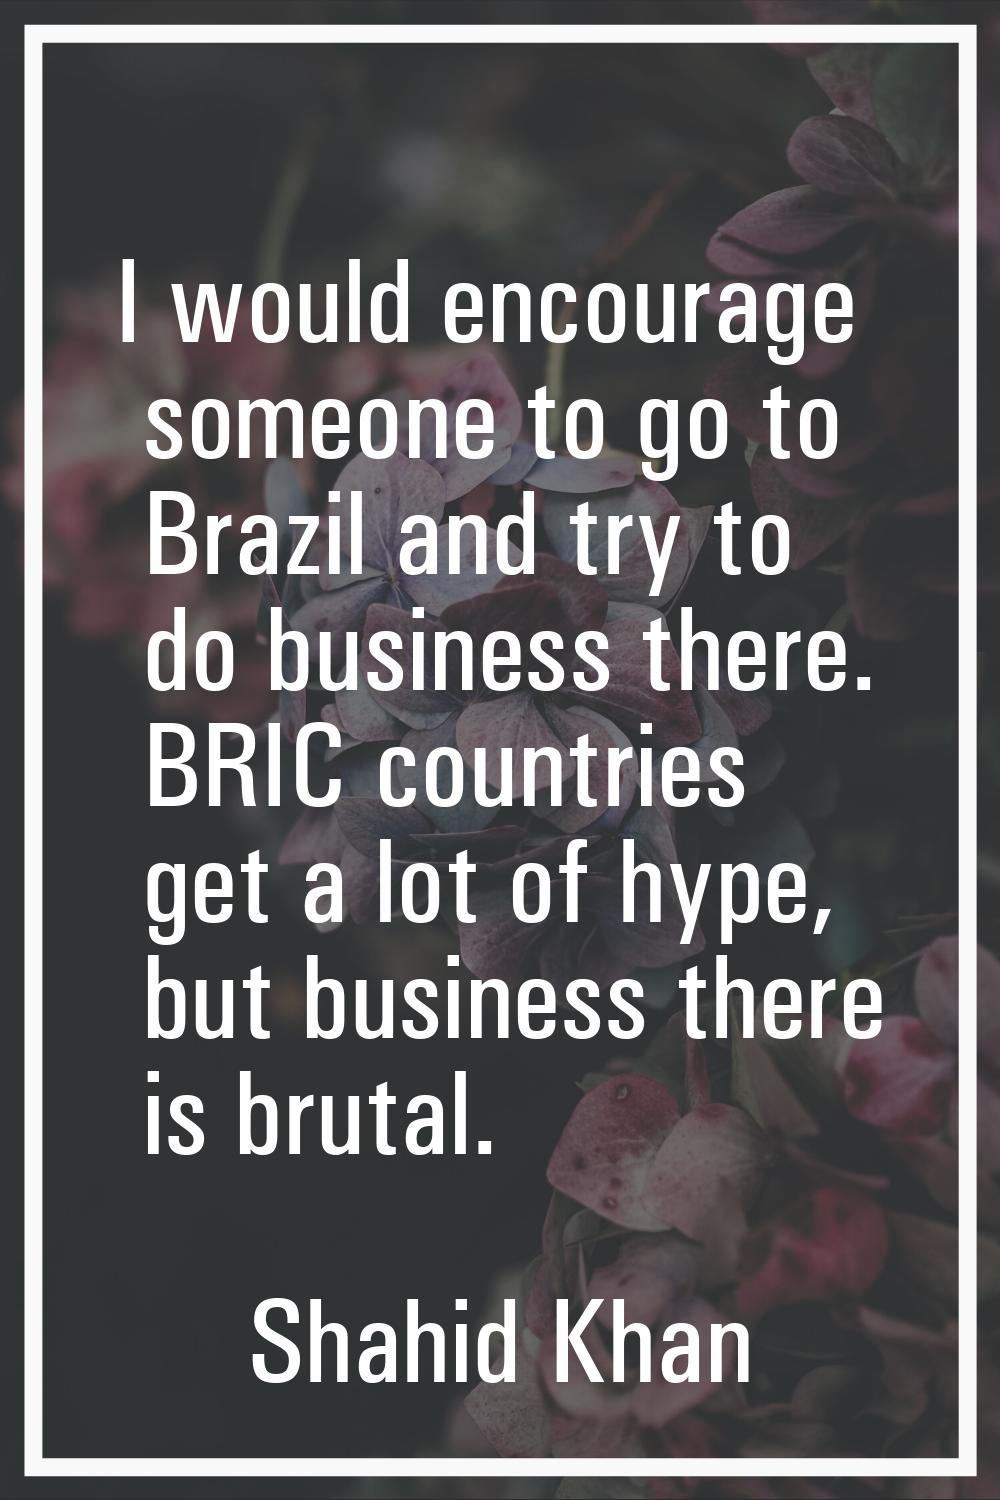 I would encourage someone to go to Brazil and try to do business there. BRIC countries get a lot of